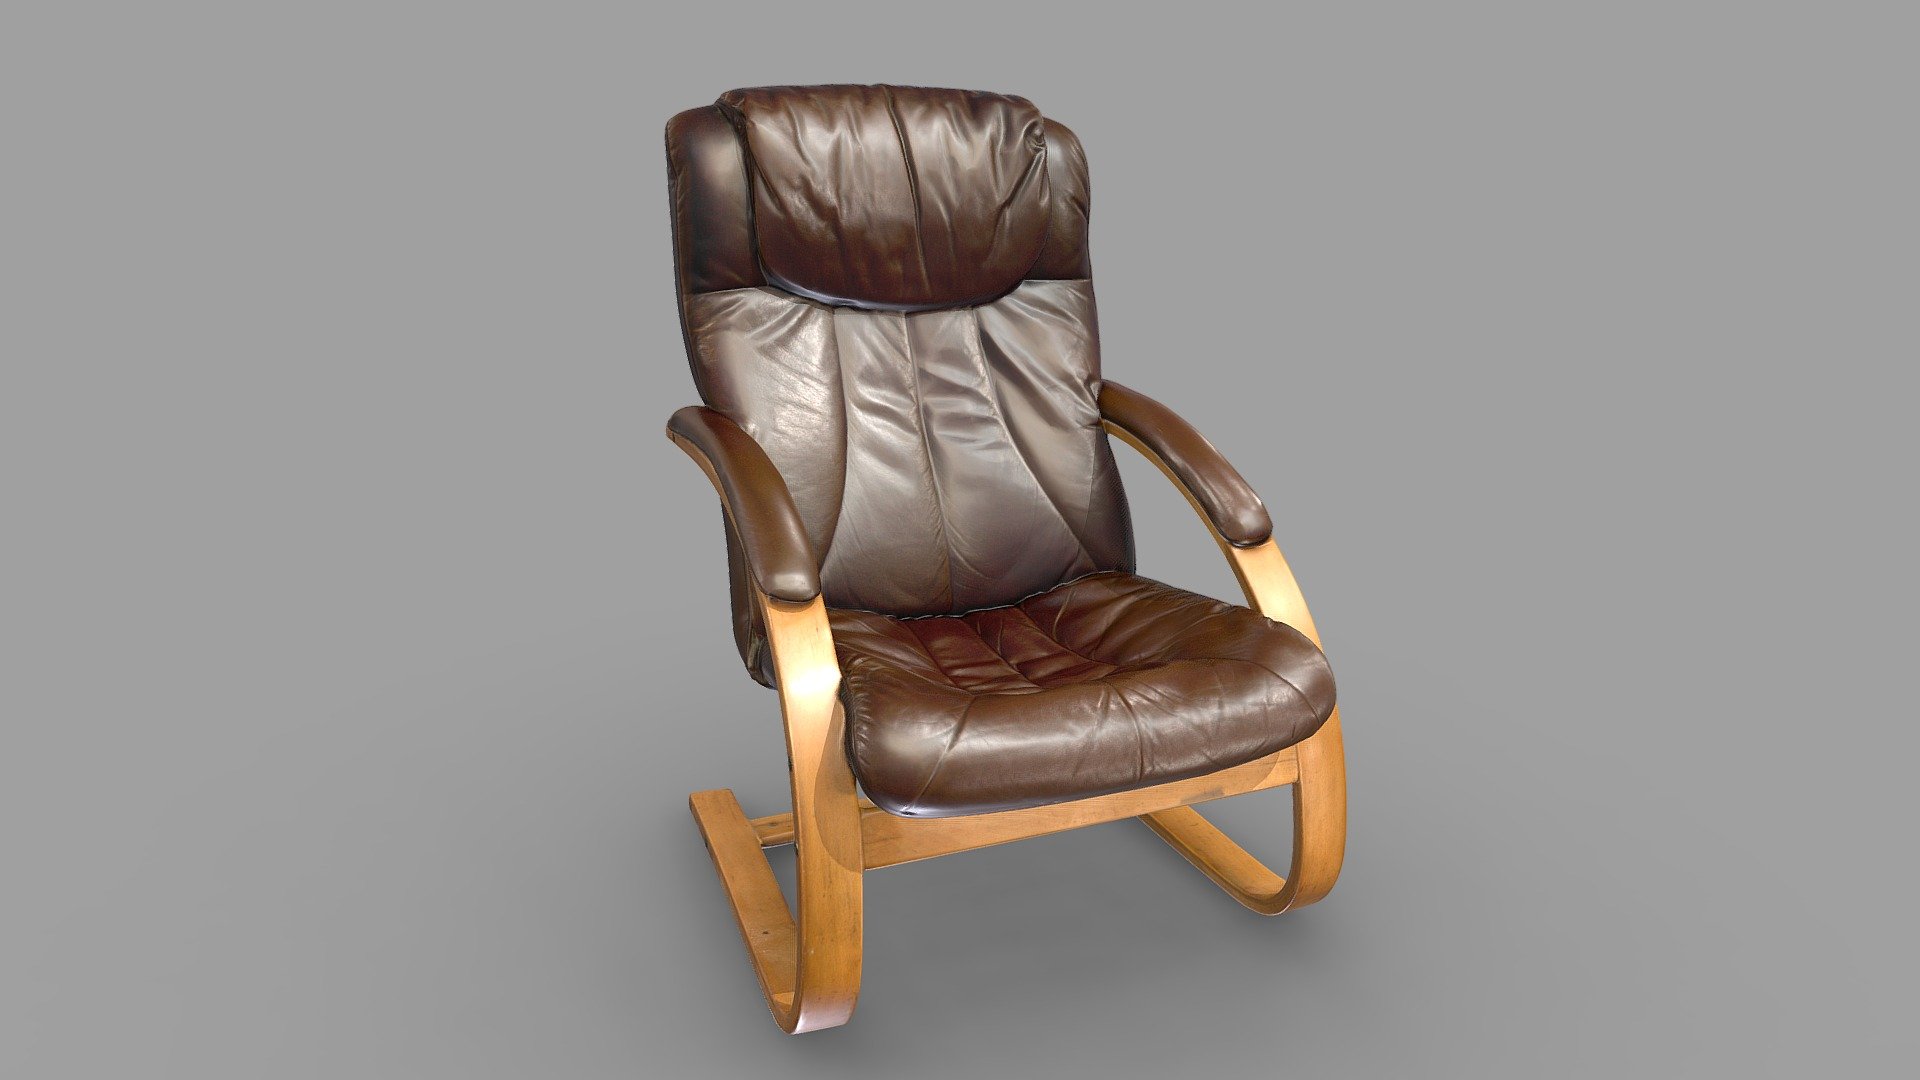 Re-scan and Re-upload of a leather chair, 3D scanned with Artec Leo. Original version had defects in the color data that went un-fixed for too long. 
This chair has not gone through &ldquo;glare reduction